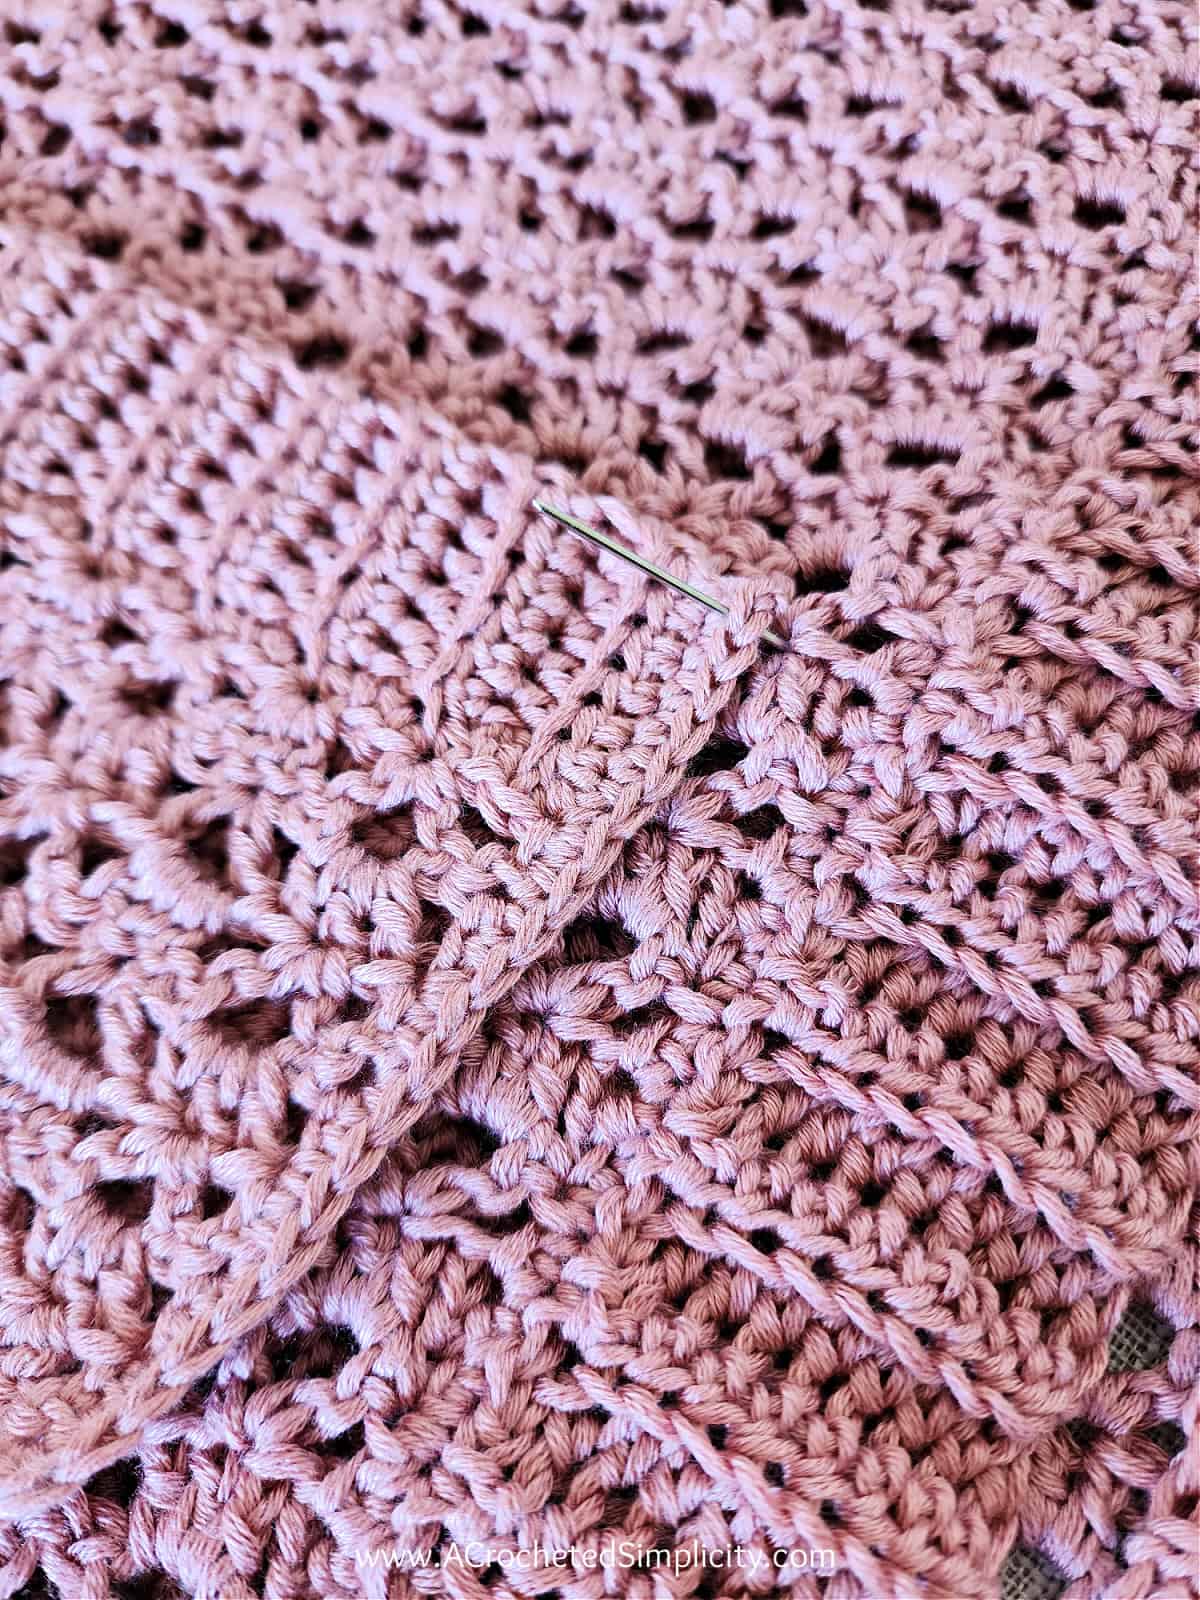 Close up of a yarn needle sewing the pocket onto the front of the cardigan.